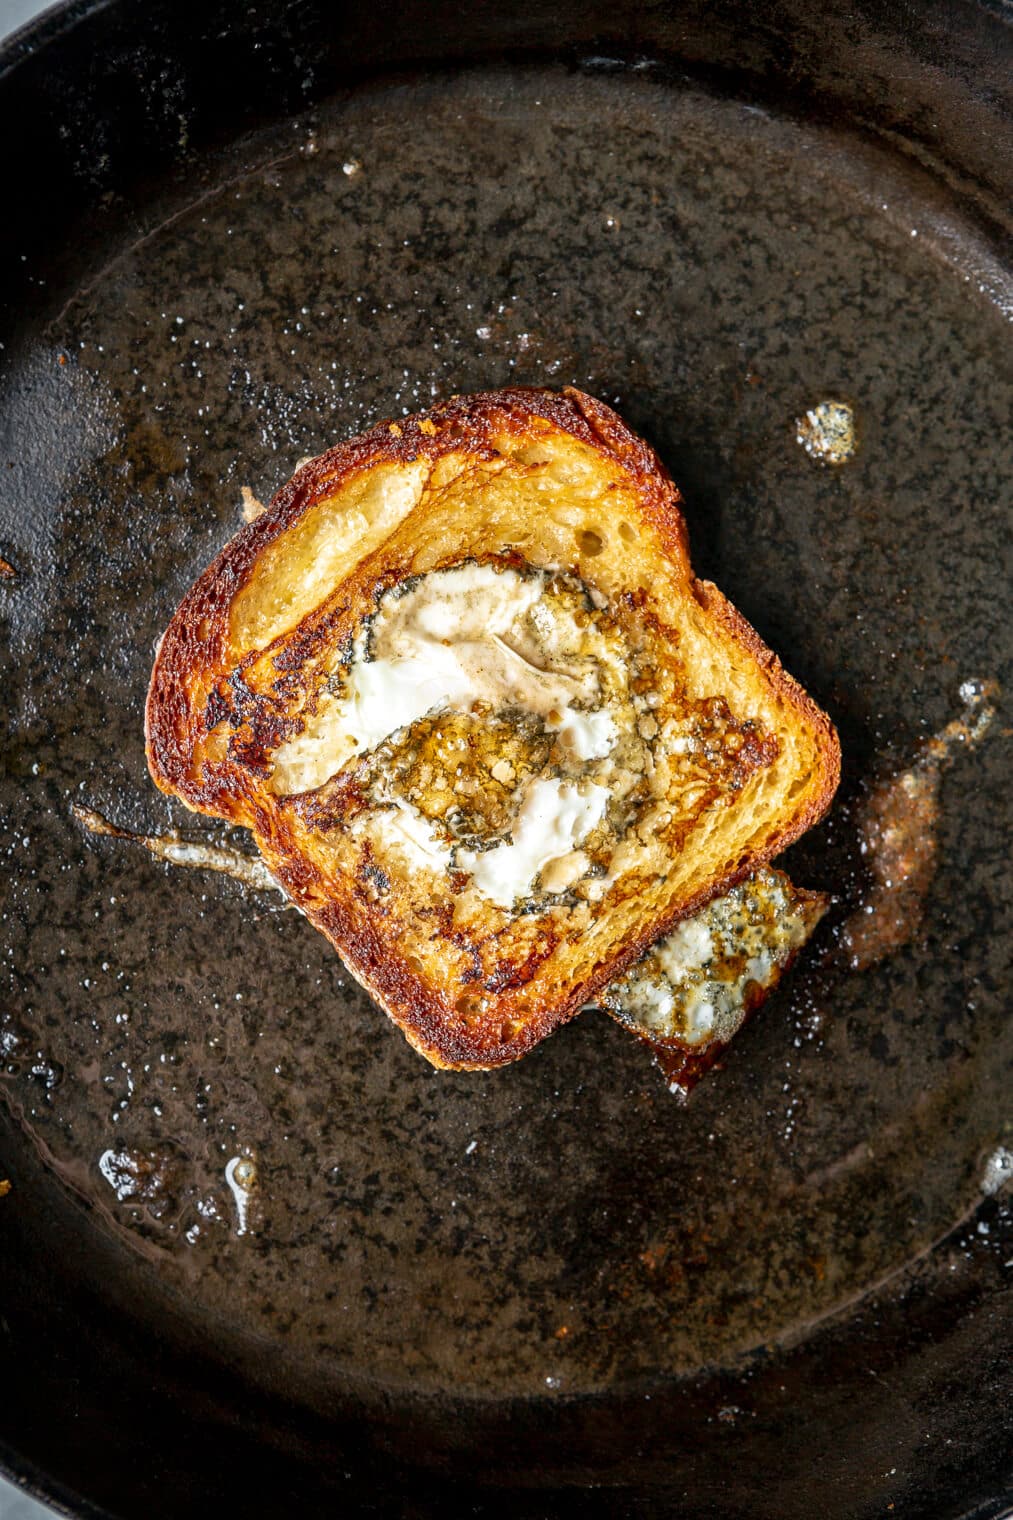 Slice of bread with egg cooked in the middle of the piece of bread in a cast iron skillet.